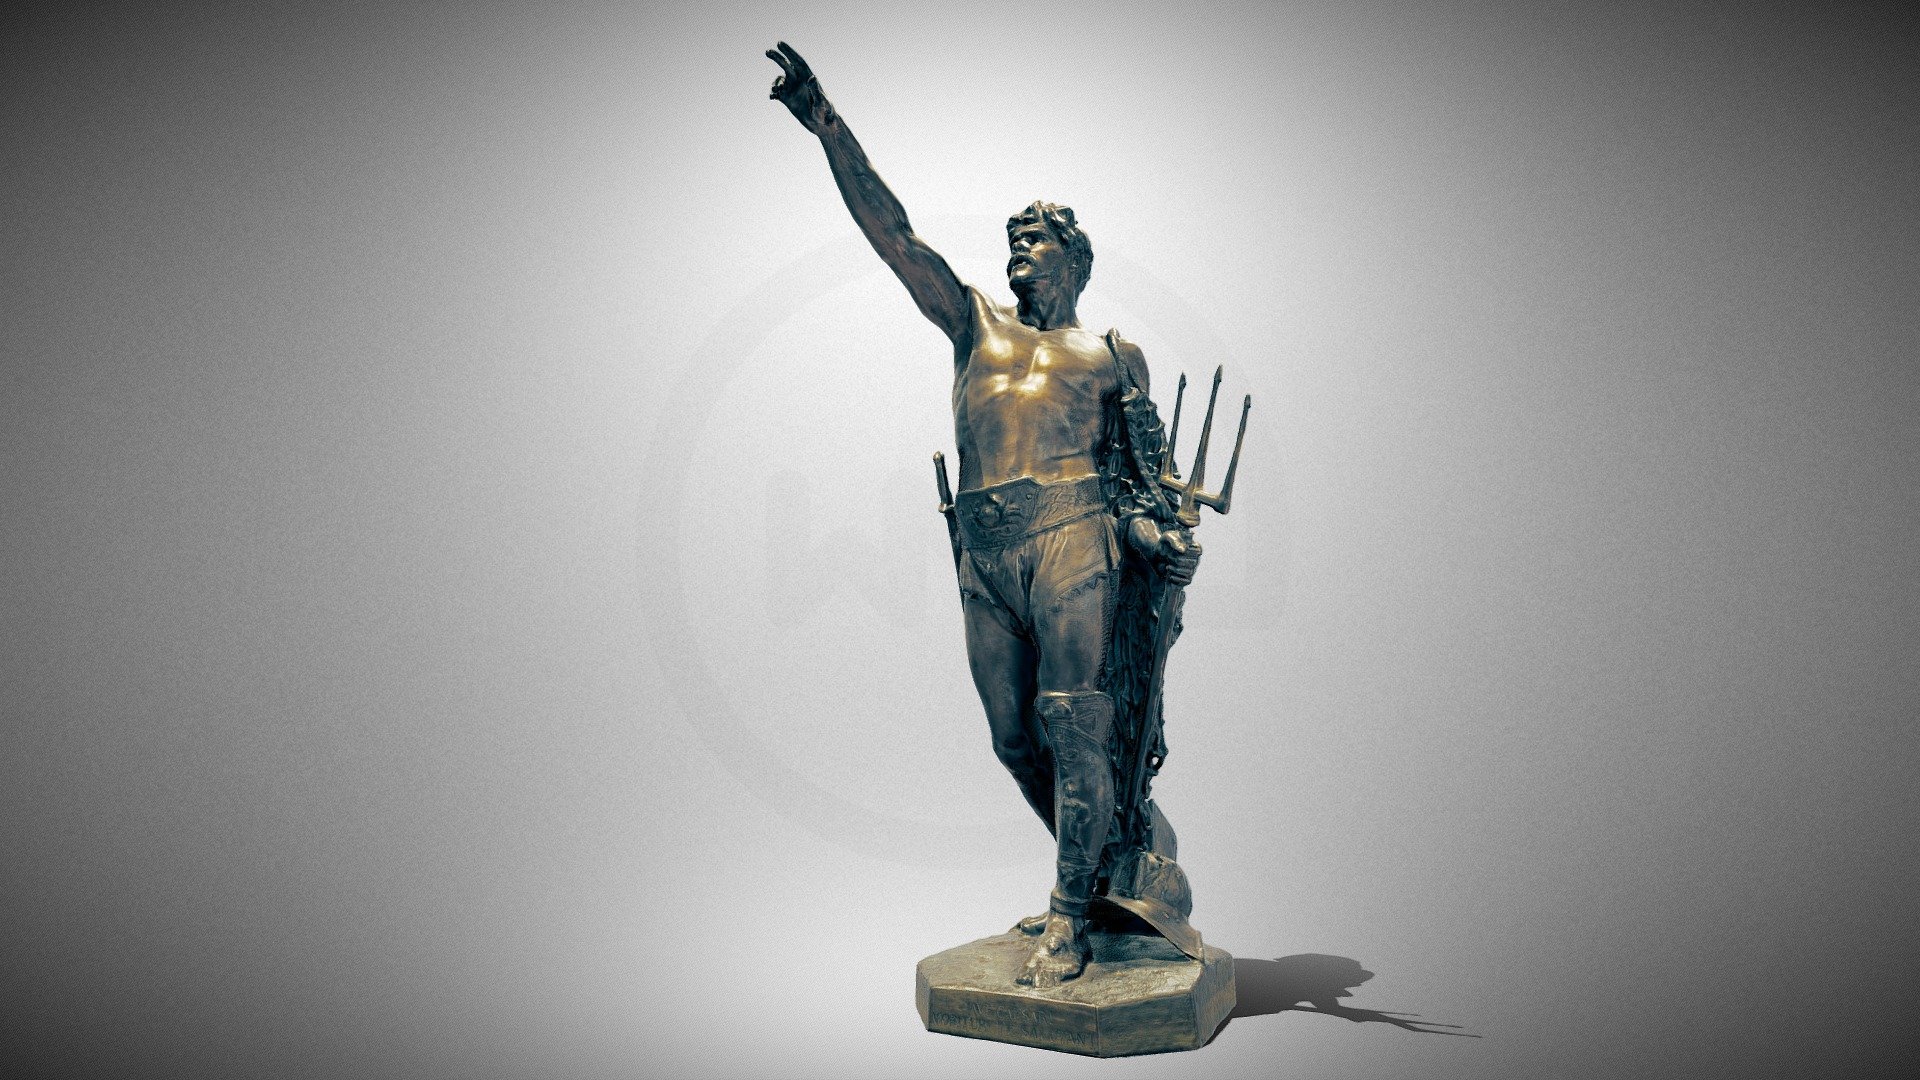 Sculpture of a Roman gladiator

A 3D model of an eighteenth-century bronze sculpture created by Pius Weloński (1849–1931).

This figurative, whole-body sculpture depicts a Roman gladiator with an upraised arm. The pedestal bears the following inscription: Ave Caesar! Morituri, salutant [Long live Caesar! Those who are going to die greet you]. The gladiator is – judging by his props – most likely a retiarius [net-fighter]. He fought with a trident or harpoon made of tuna bones, a dagger, and a net that he threw at his opponent’s head.

For more images and further information, visit: https://muzea.malopolska.pl/en/objects-list/21

Inventory number: MNK II-rz-340

Location of the physical object: National Museum in Kraków, Poland

Digitalisation: Regional Digitalisation Lab, Małopolska Institute of Culture in Kraków, Poland; “Virtual Museums of Małopolska” project 3d model